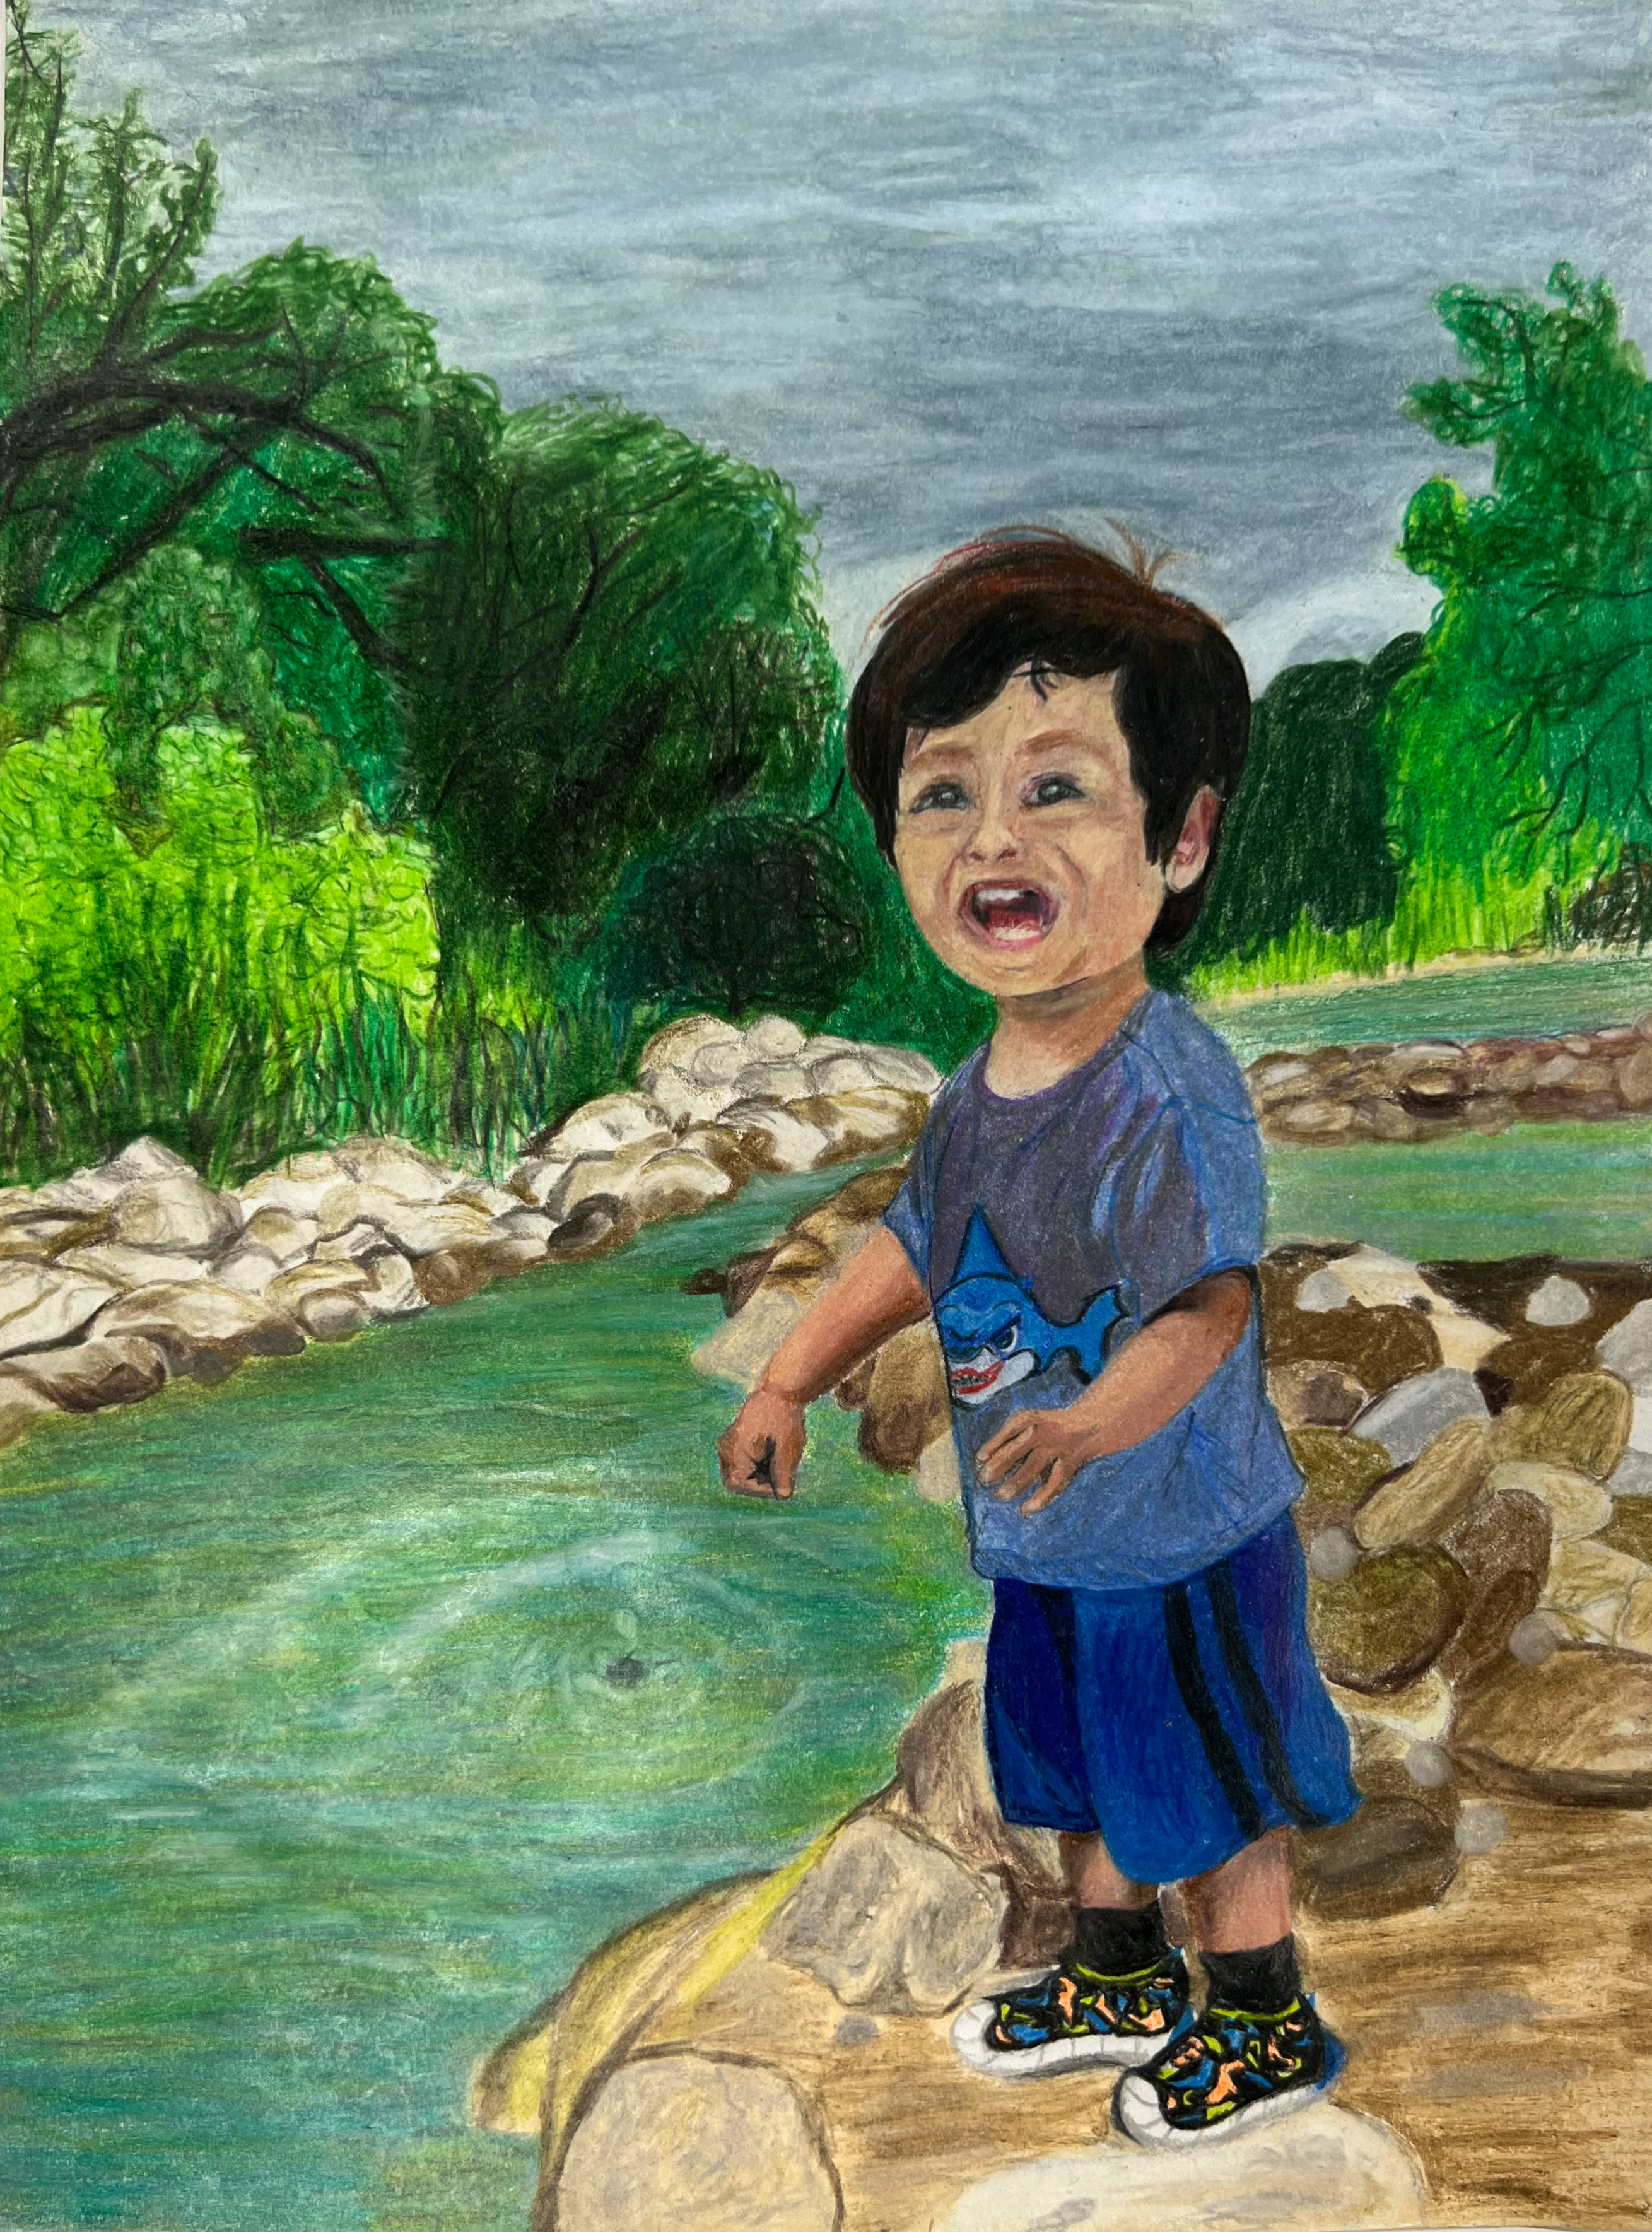 Colored Pencil drawing of a child by the river